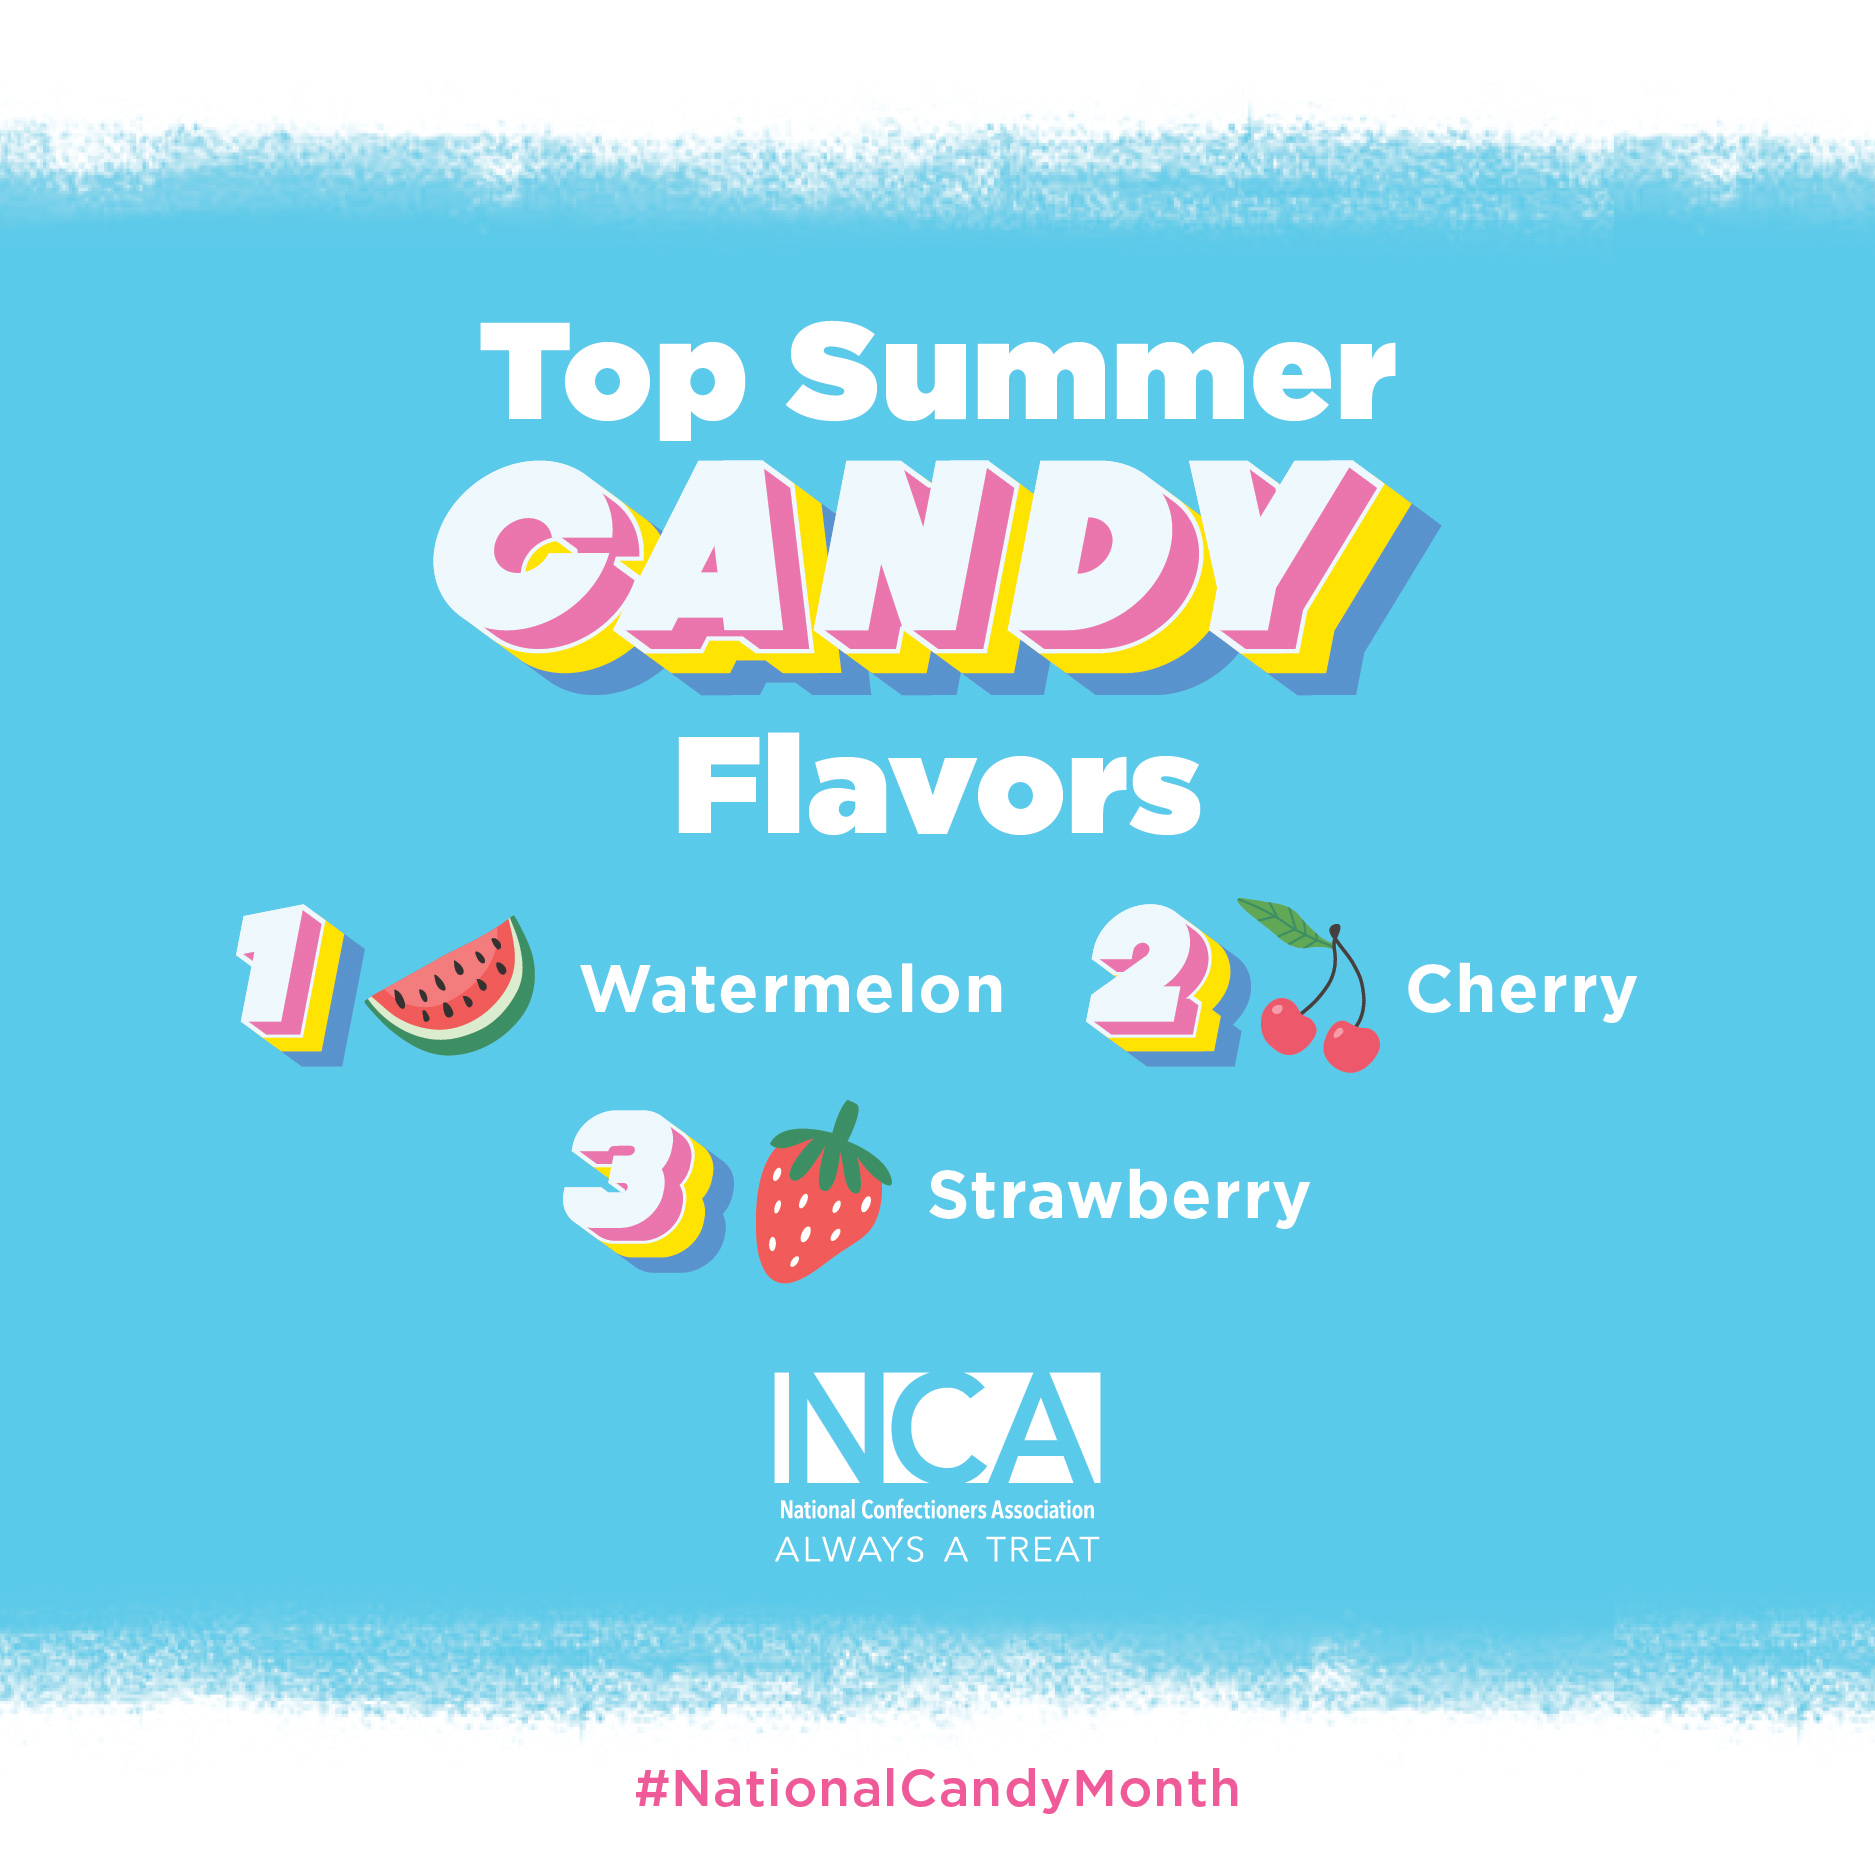 Consumers Kick Off the Summer With National Candy Month in June